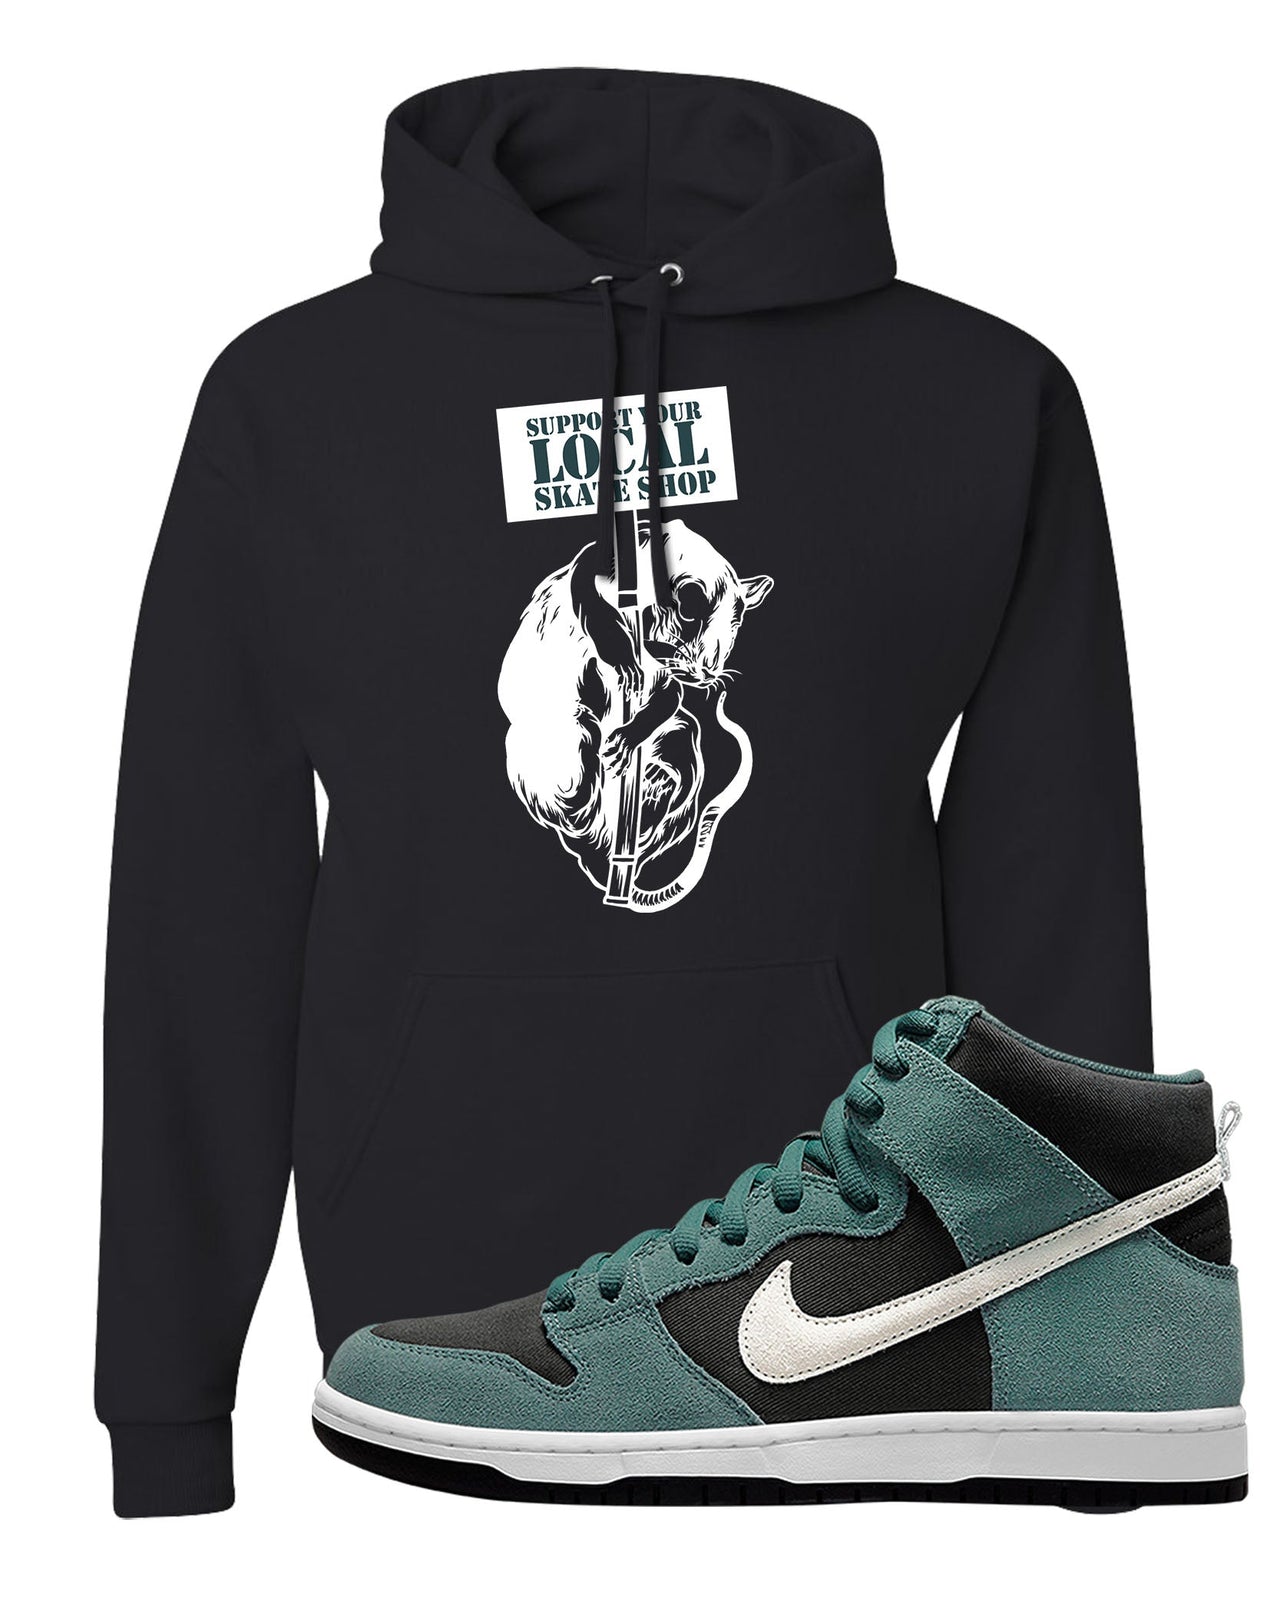 Green Suede High Dunks Hoodie | Support Your Local Skate Shop, Black